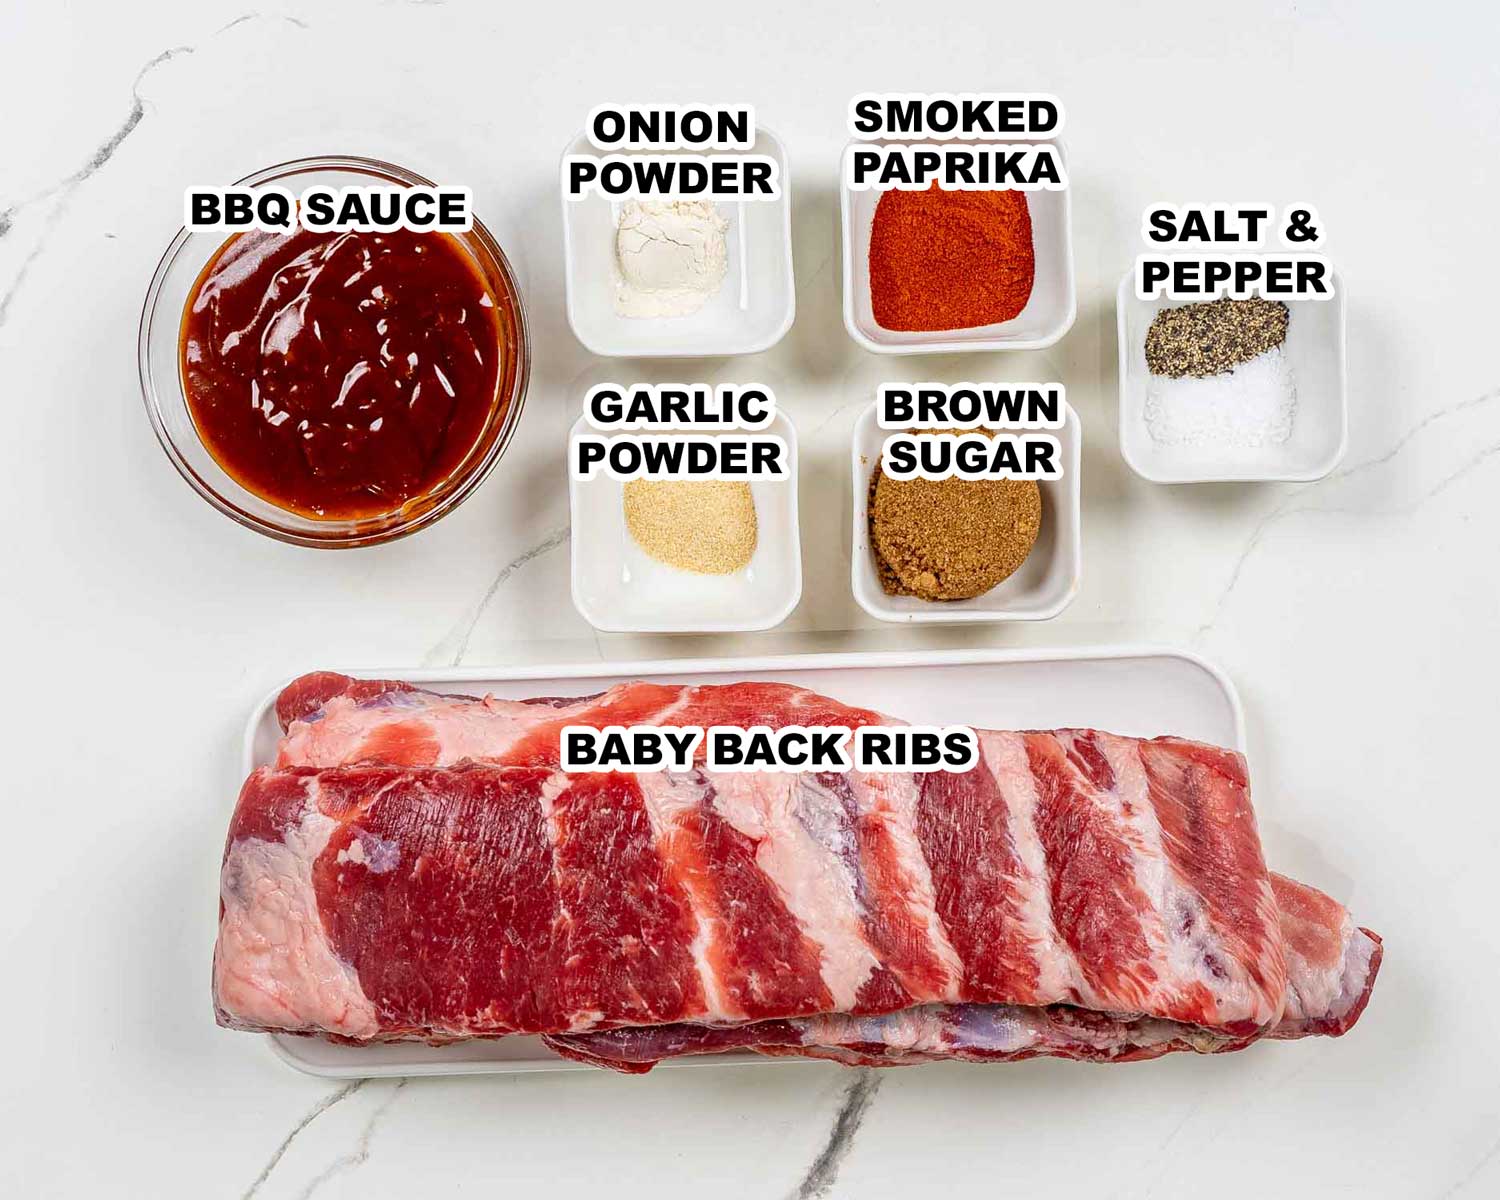 ingredients needed to make oven baked bbq ribs.